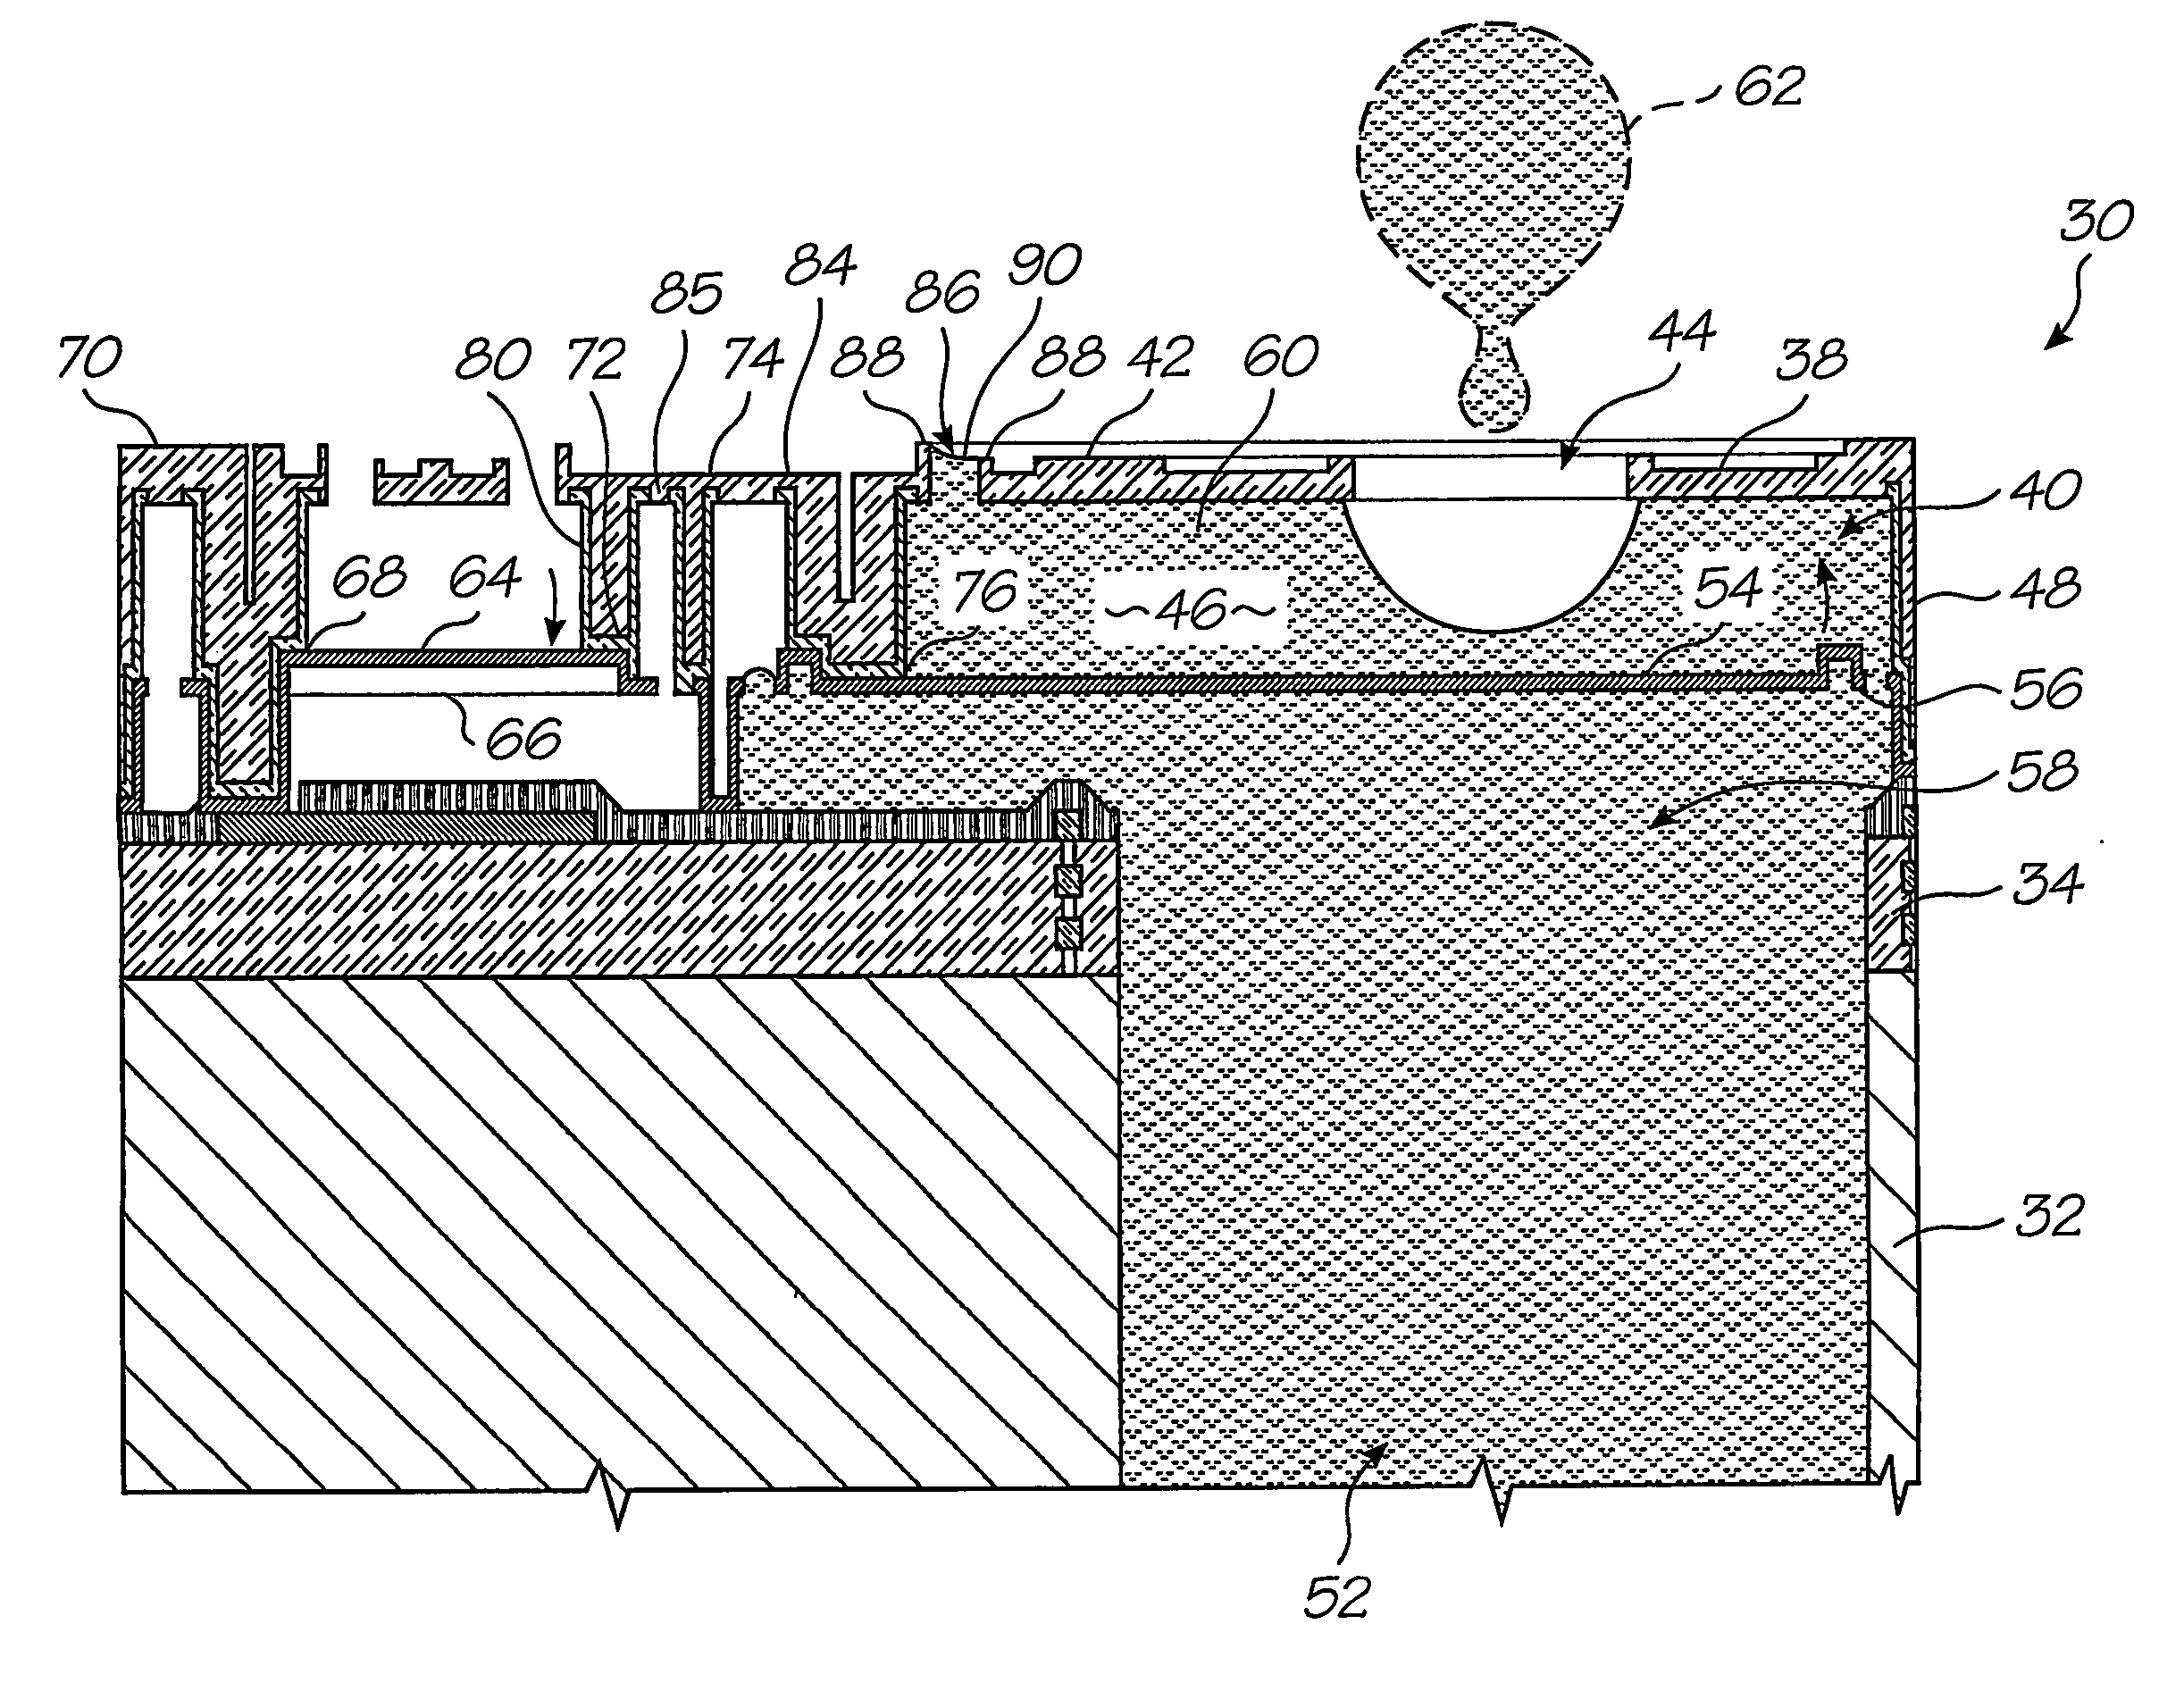 Motion transmitting structure for a nozzle arrangement of a printhead chip for an inkjet printhead